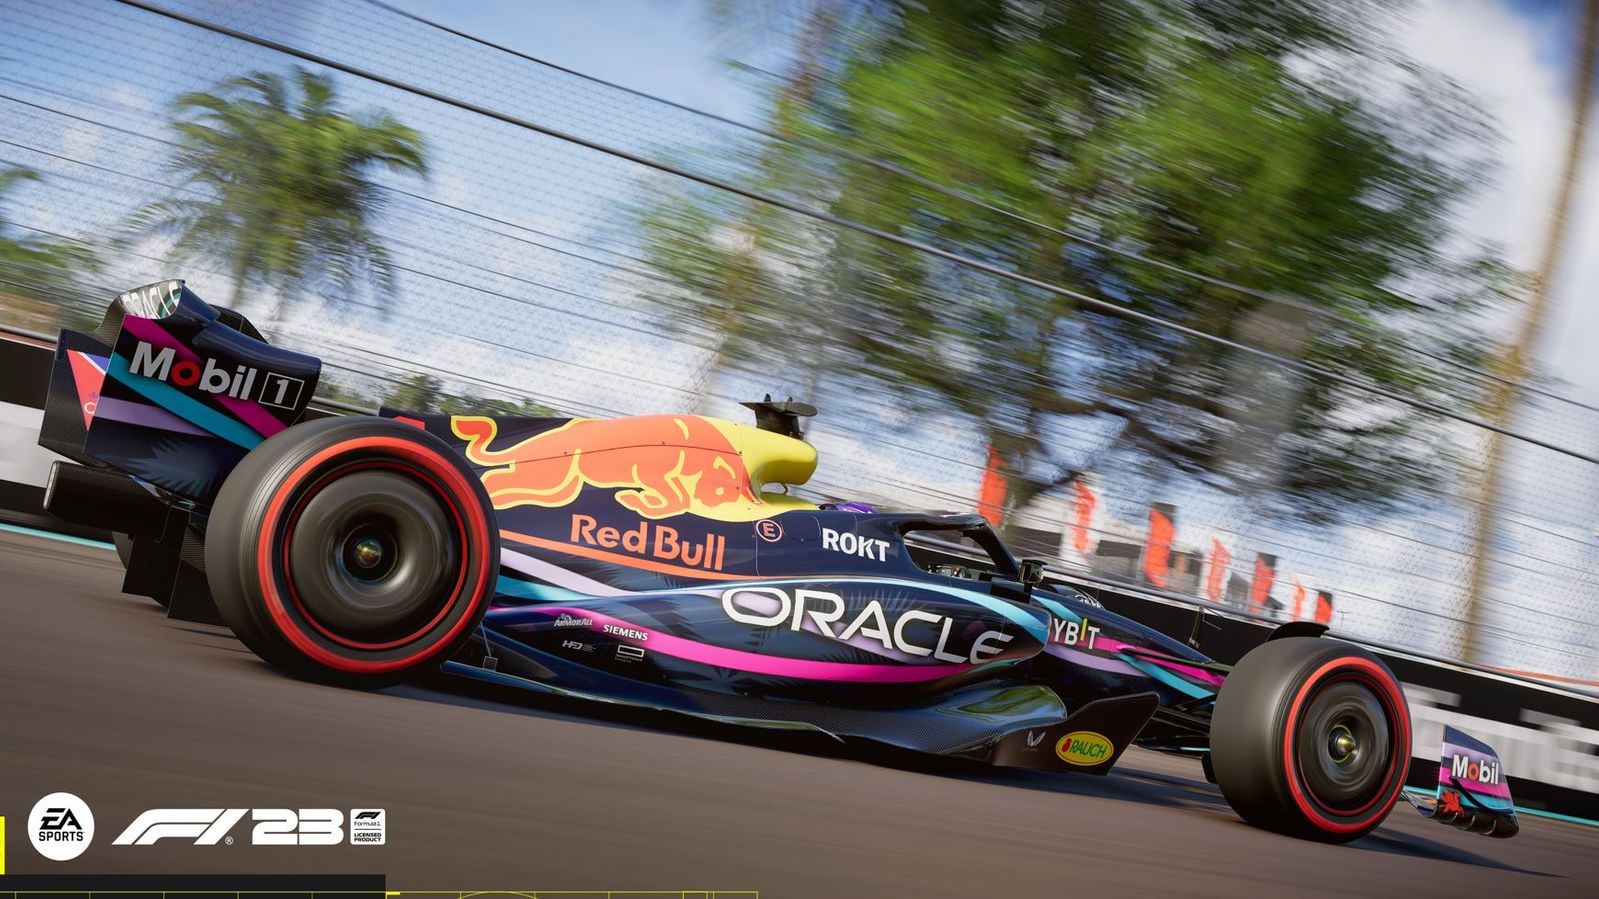 Red Bull Racing's Miami livery in F1 23